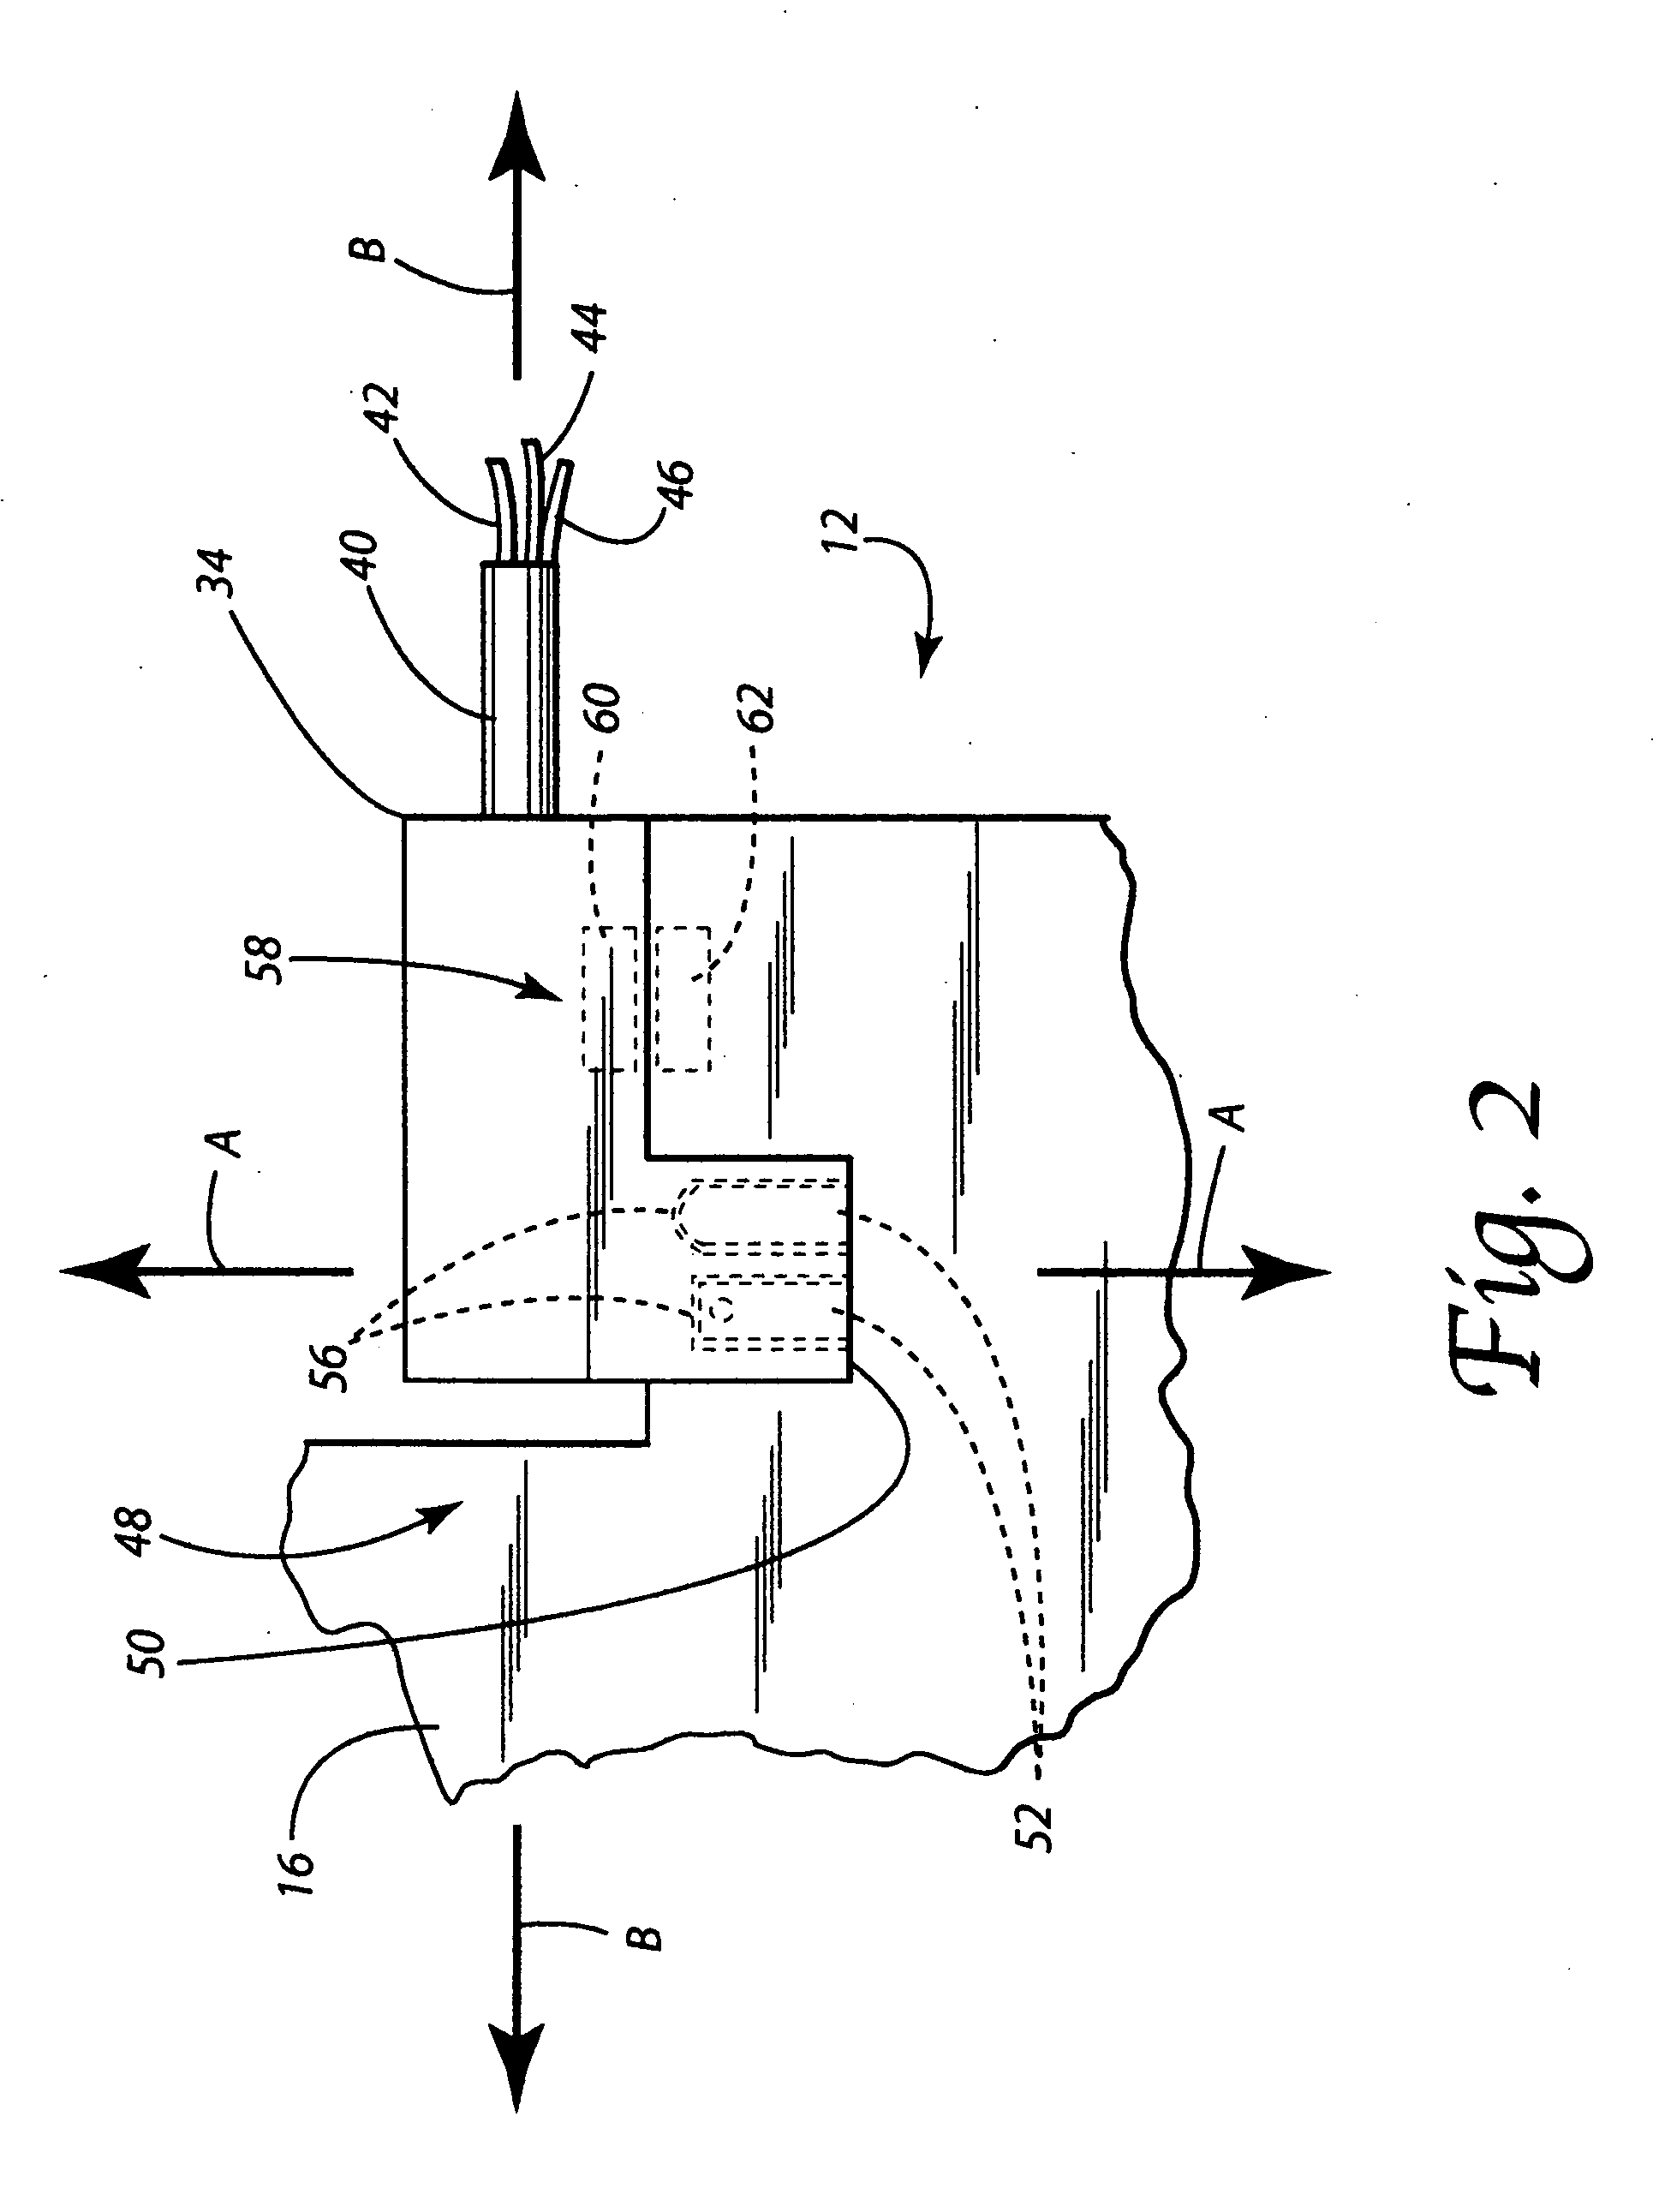 Floor care appliance equipped with detachable power cord